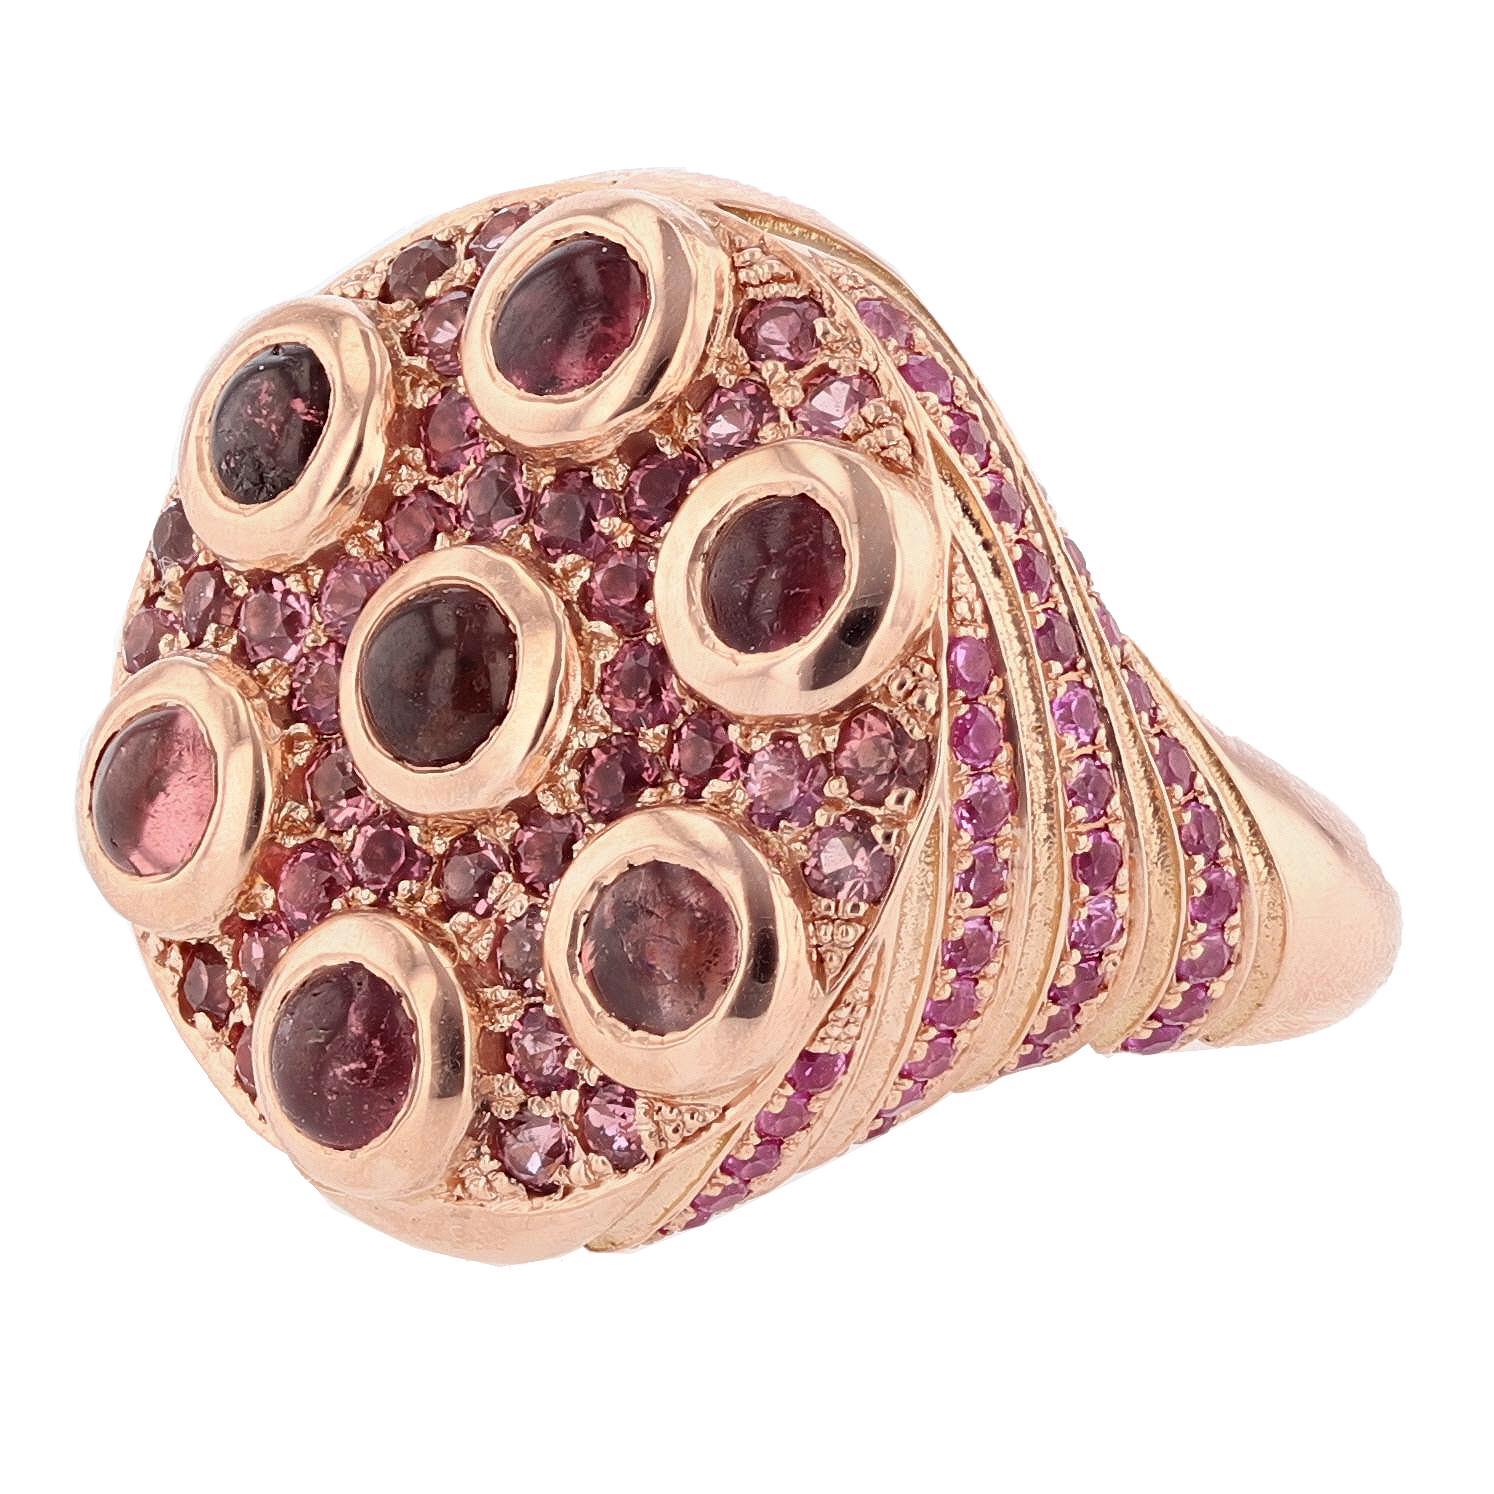 This ring is designed by Nazarelle and made in 14k rose gold. The ring features 7 round cut bezel set cabochon pink tourmalines weighing 2.29ct, 74 round cut prong set pink sapphires weighing 0.84ct, and 36 round cut prong set pink tourmalines